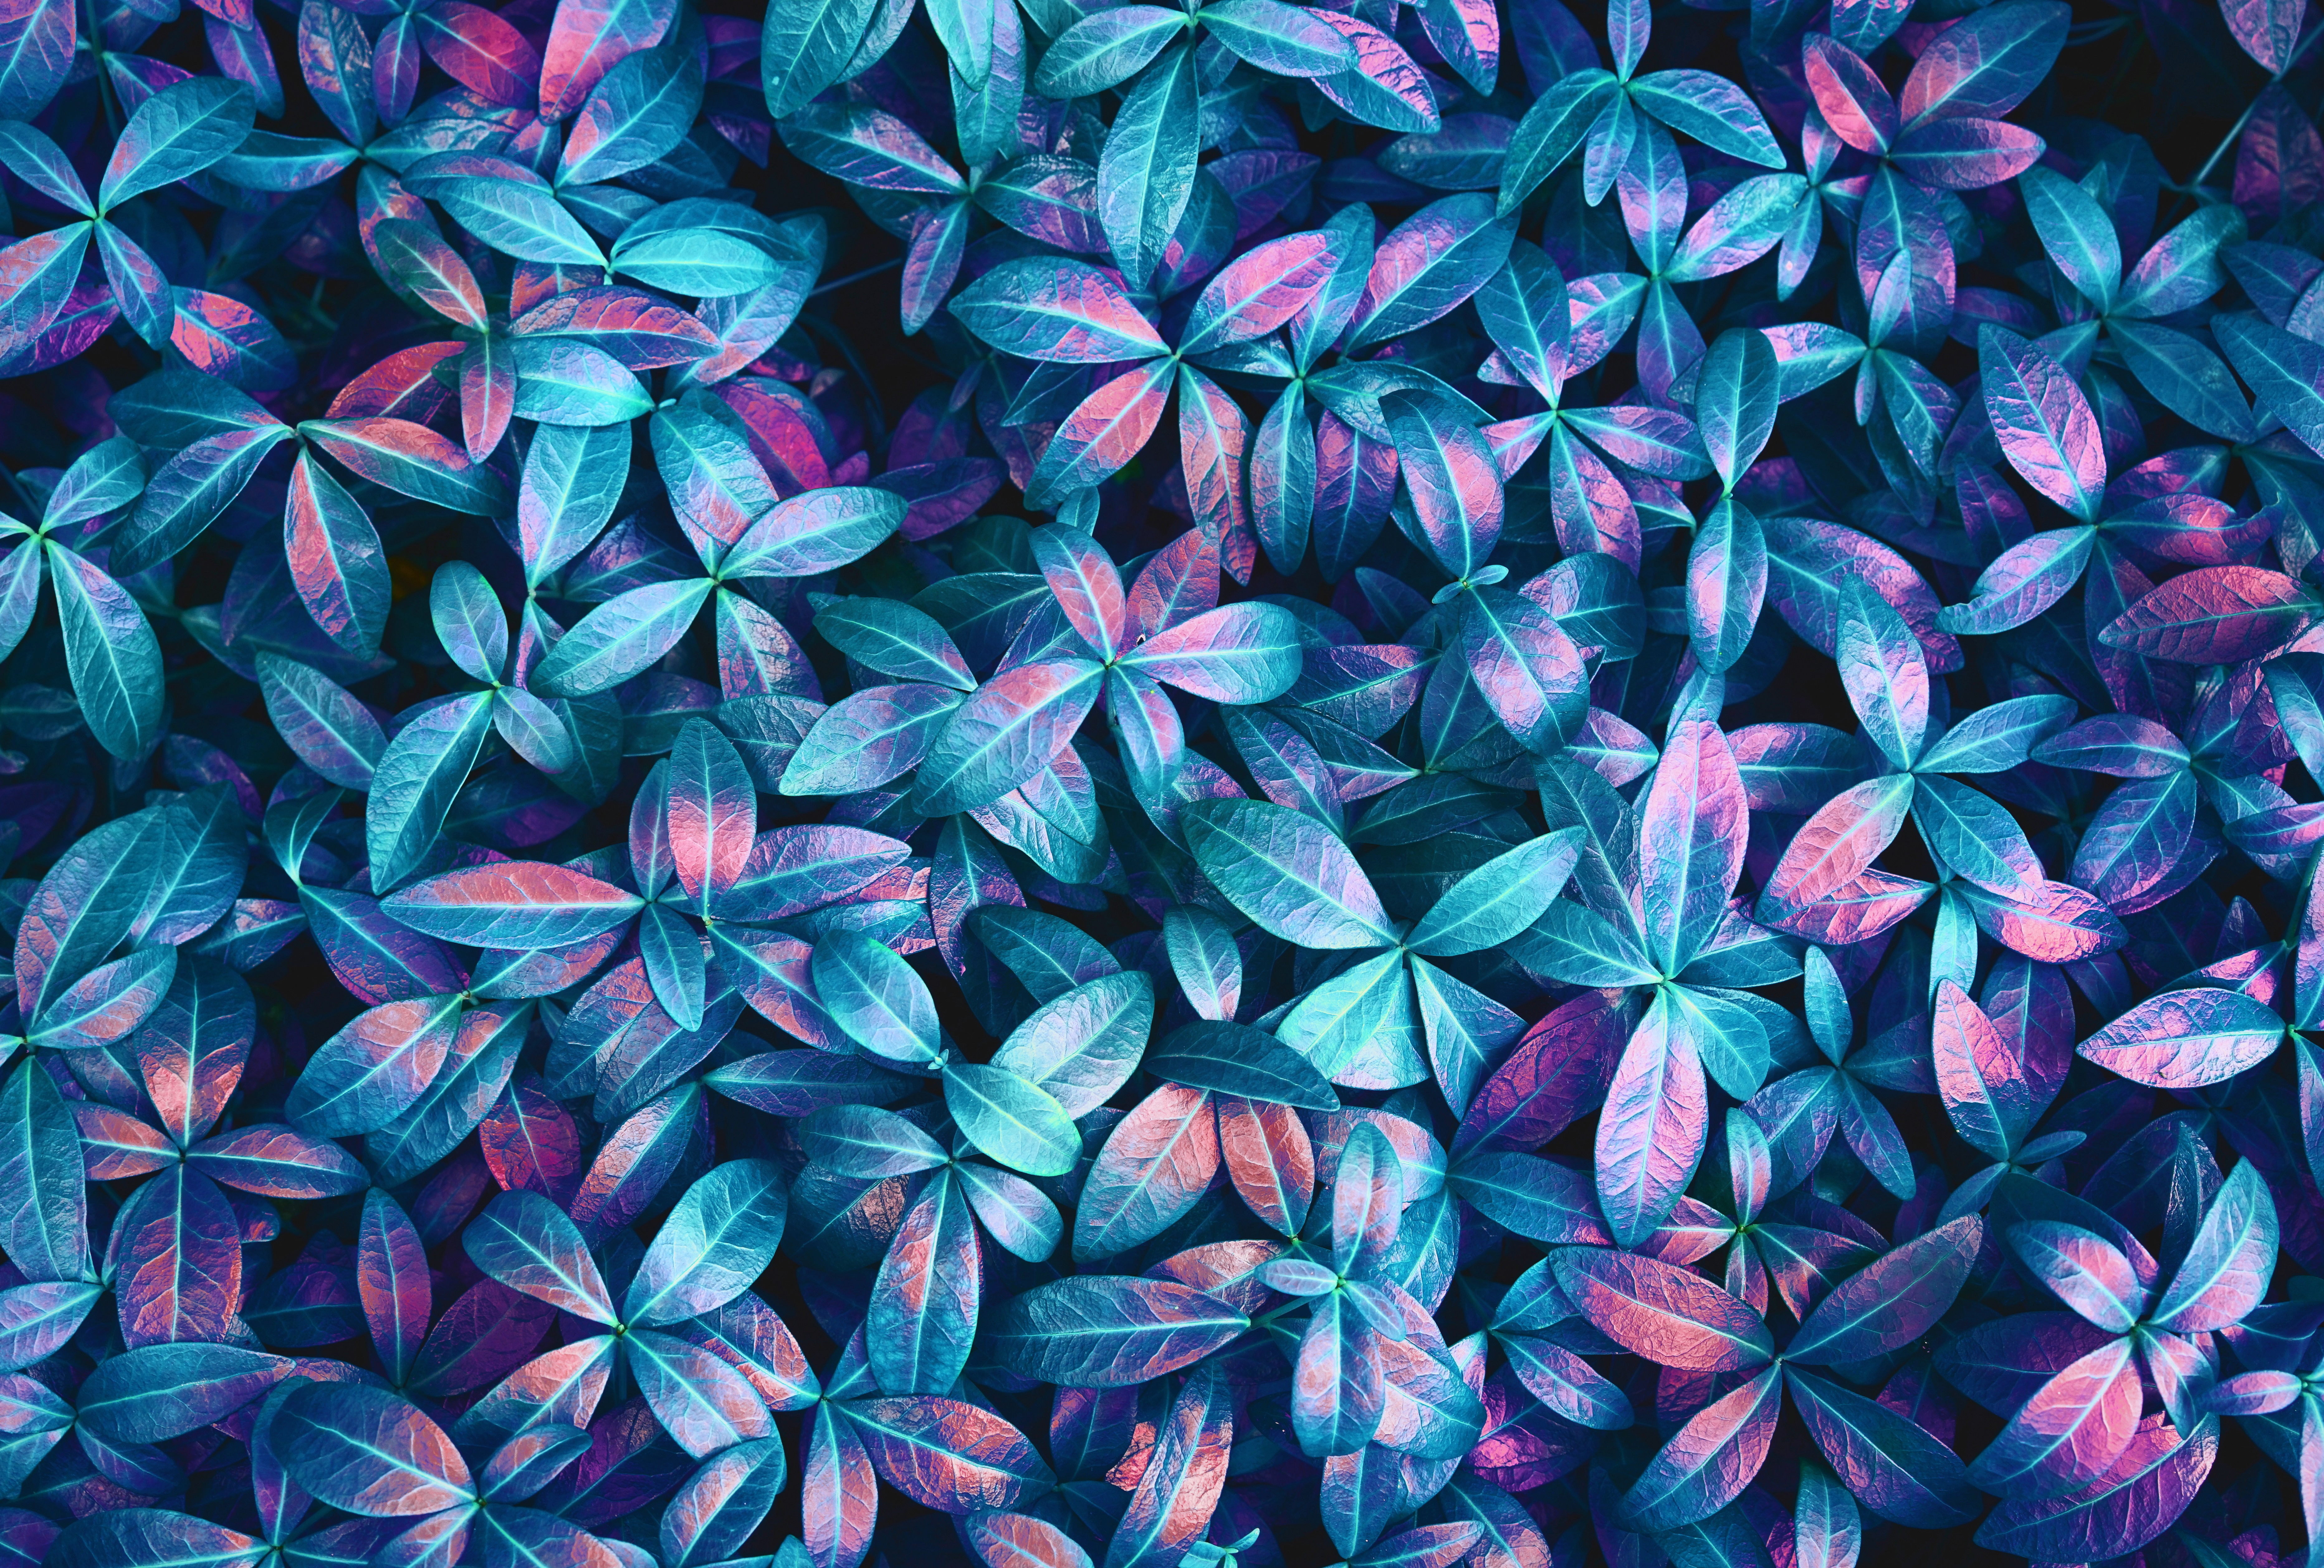 Plants Leaves Pink Blue Purple Backdrop Spring Lights Neon Green Details Abstract Colorful 7458x5033